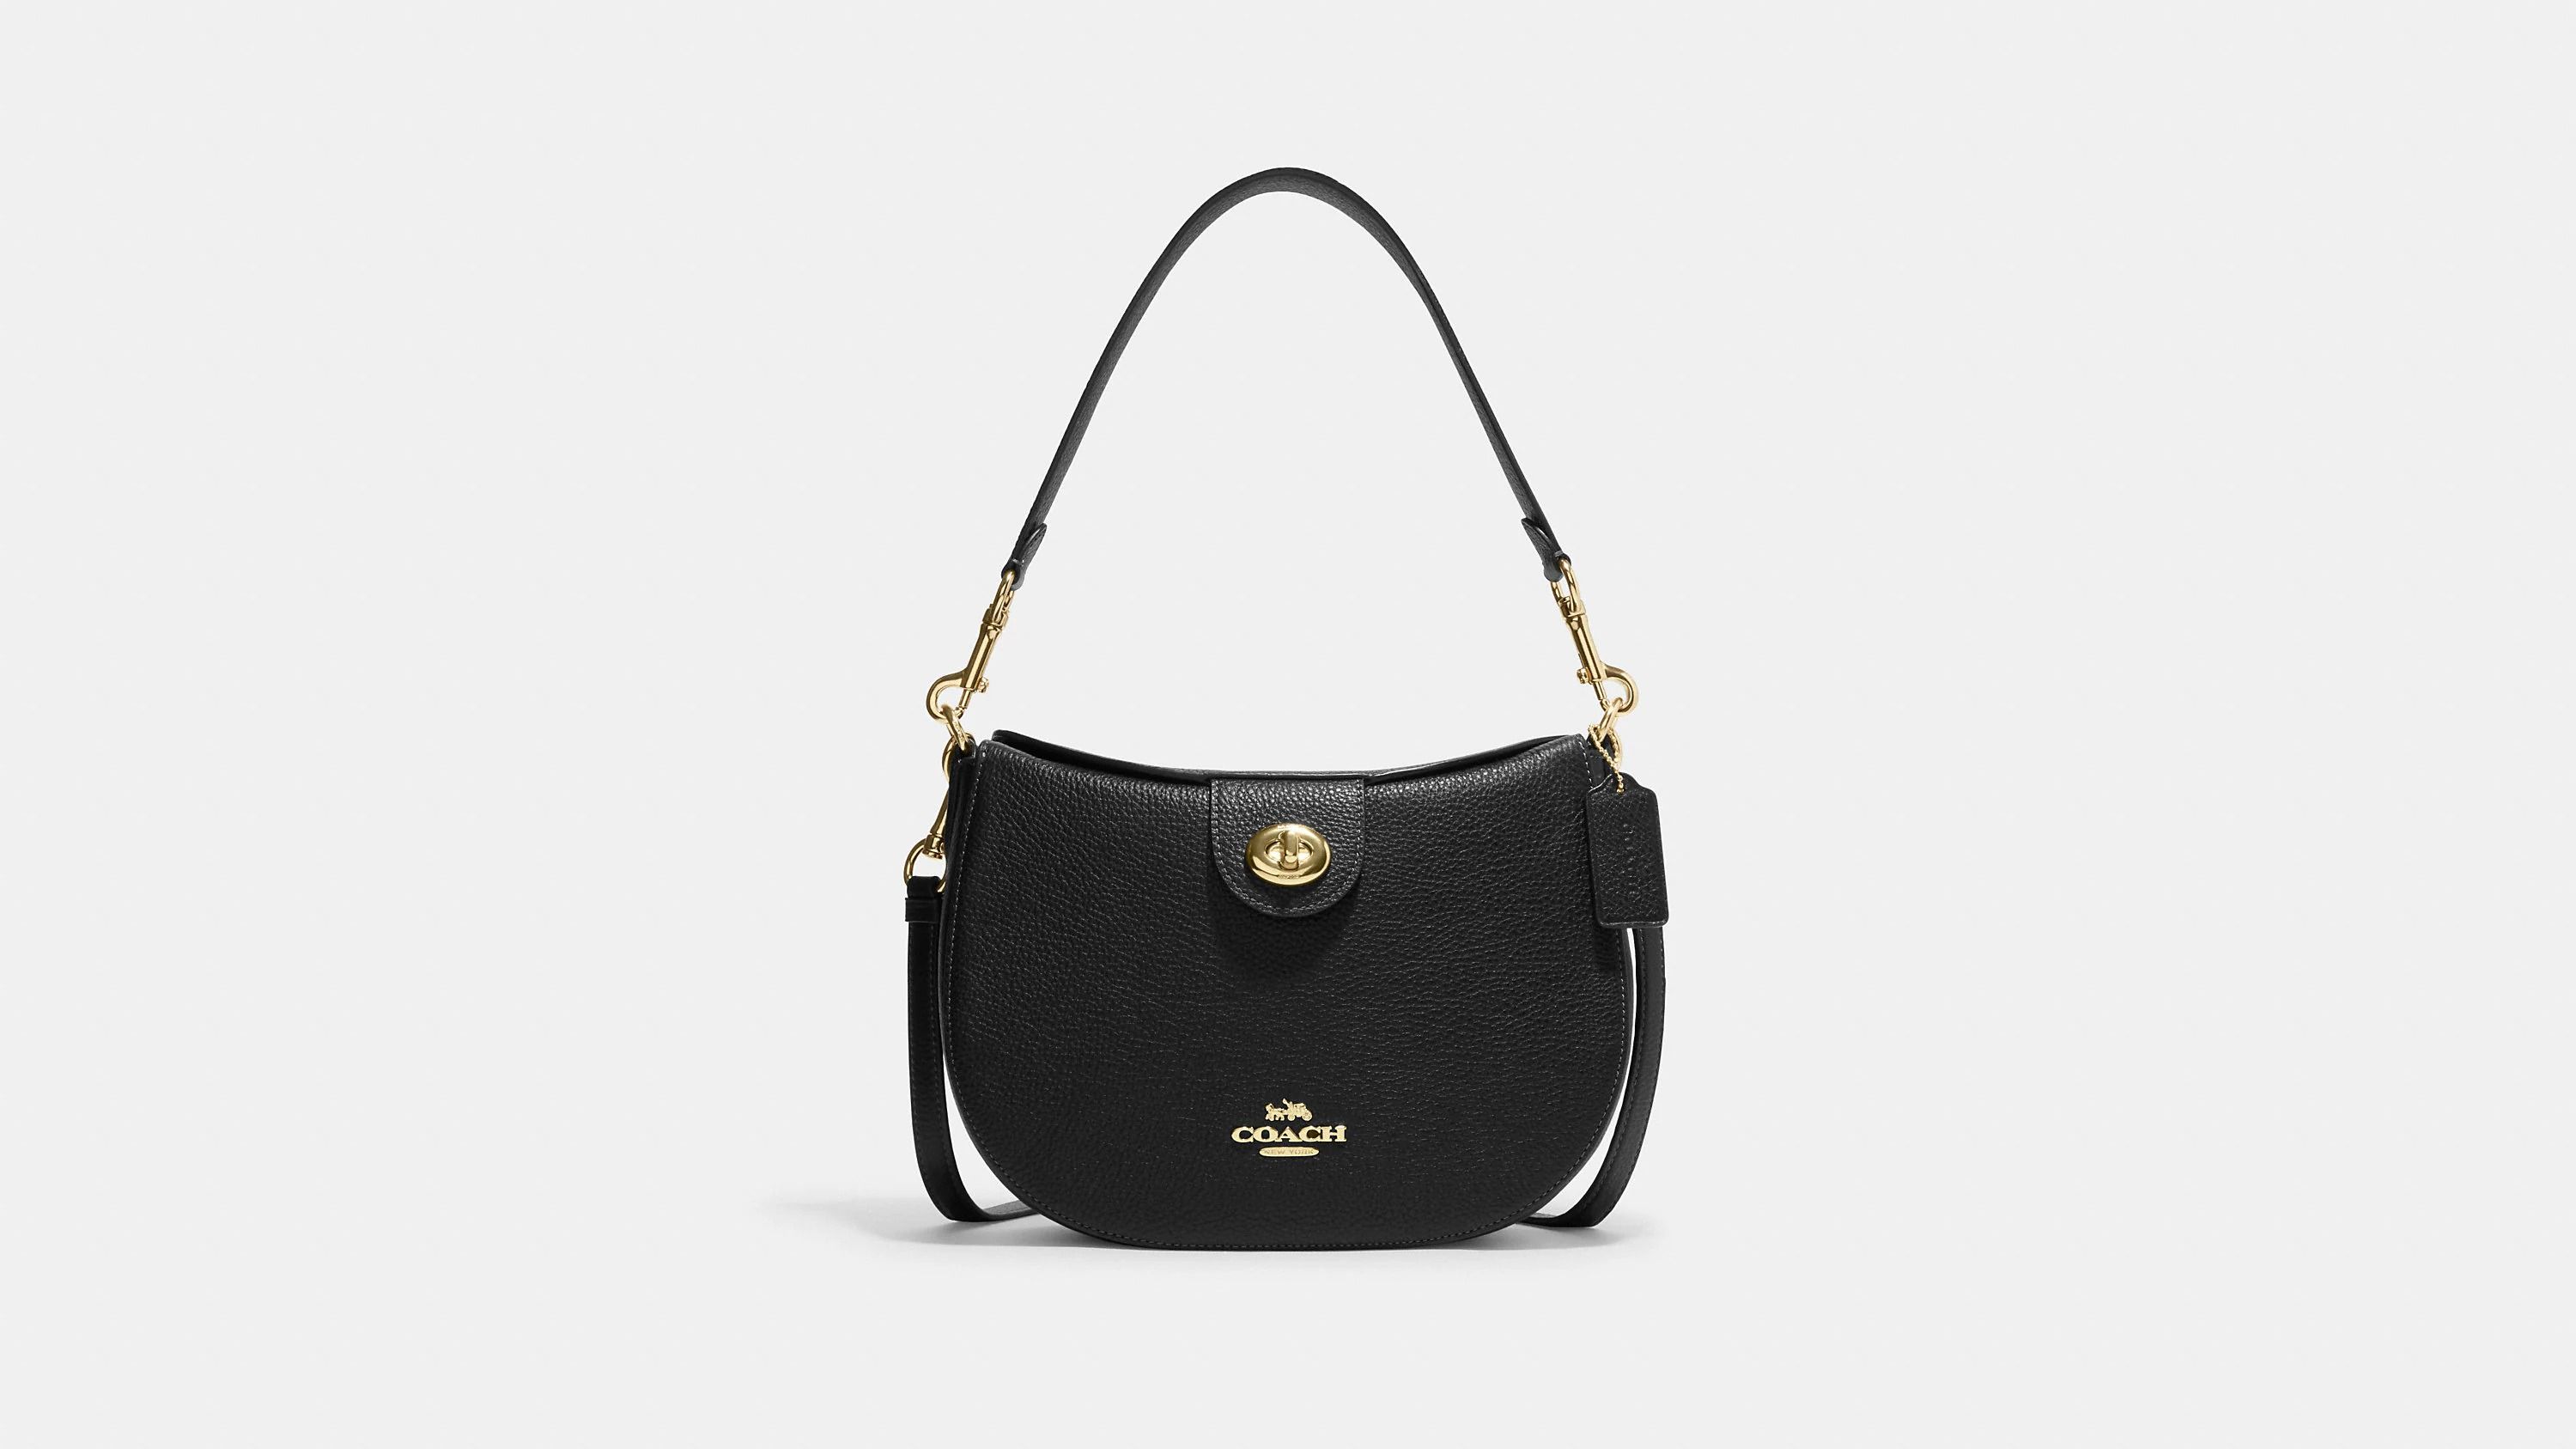 Coach Flash Deal: This $298 Coach Tote Bag Is on Sale for $89